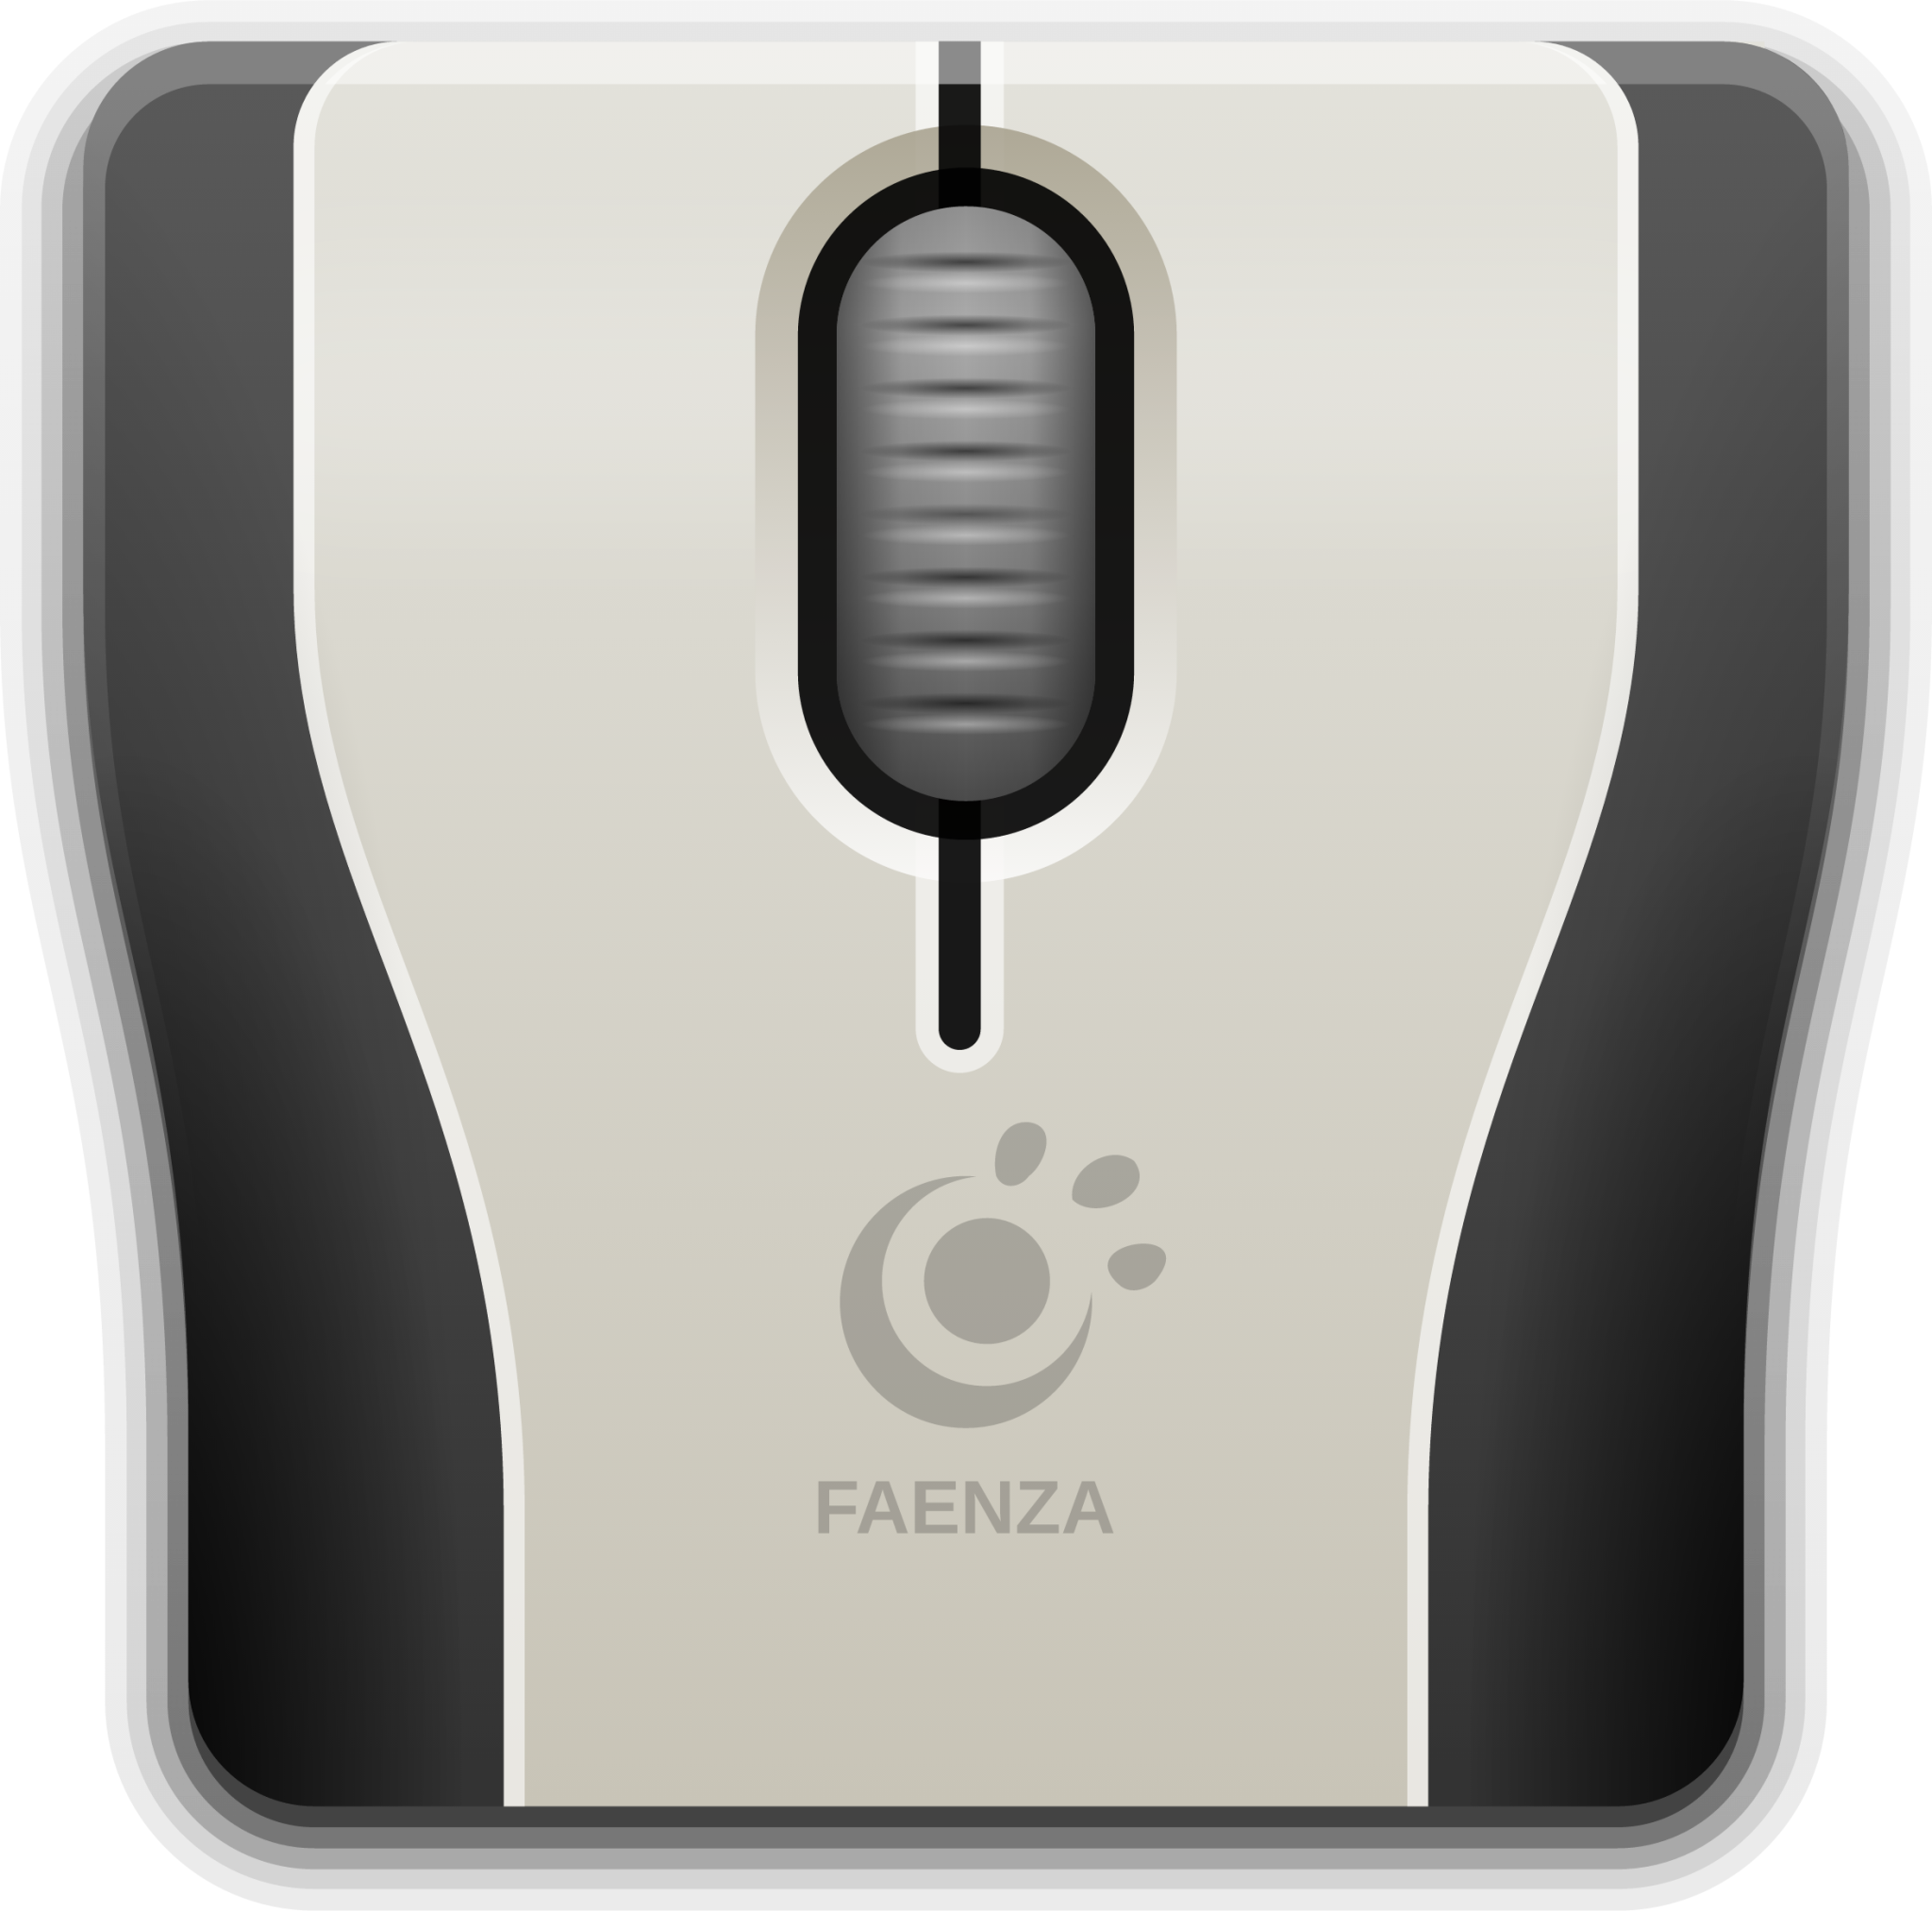 xfce4 mouse icon